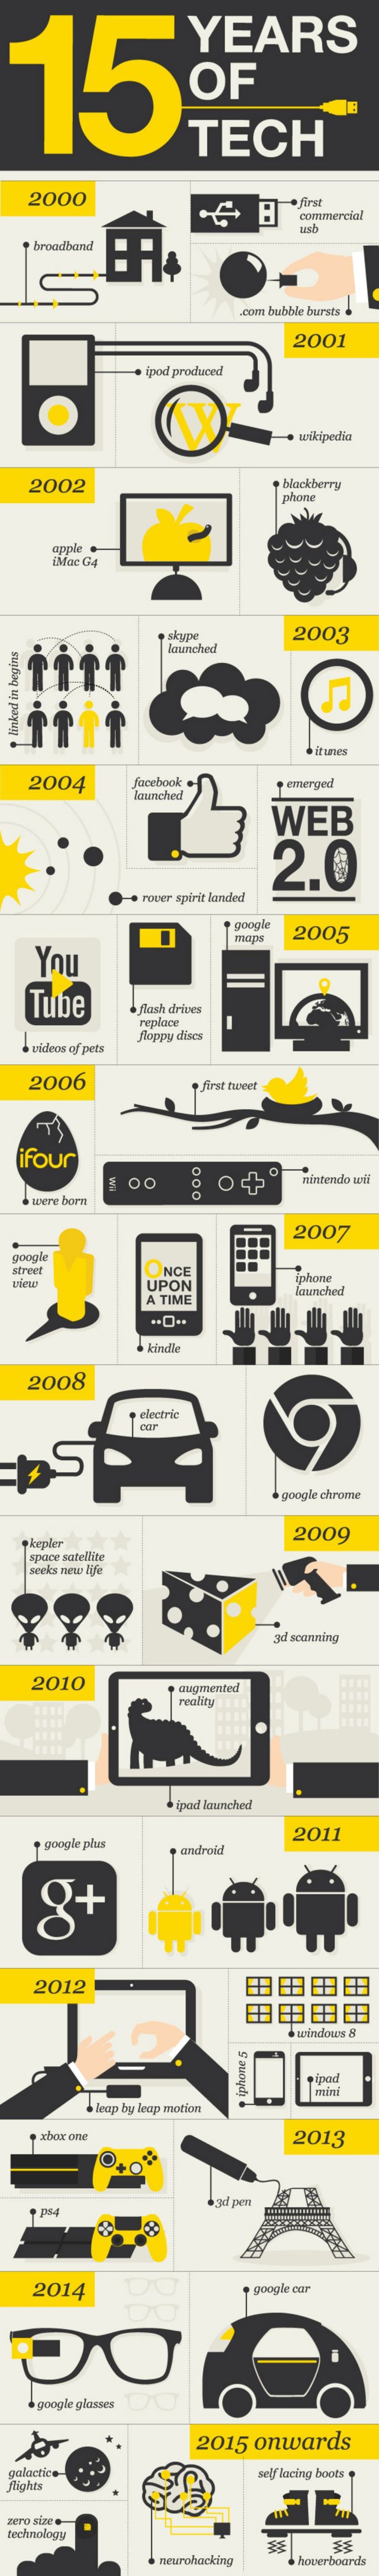 Picture of: frantic years of tech innovation (infographic)